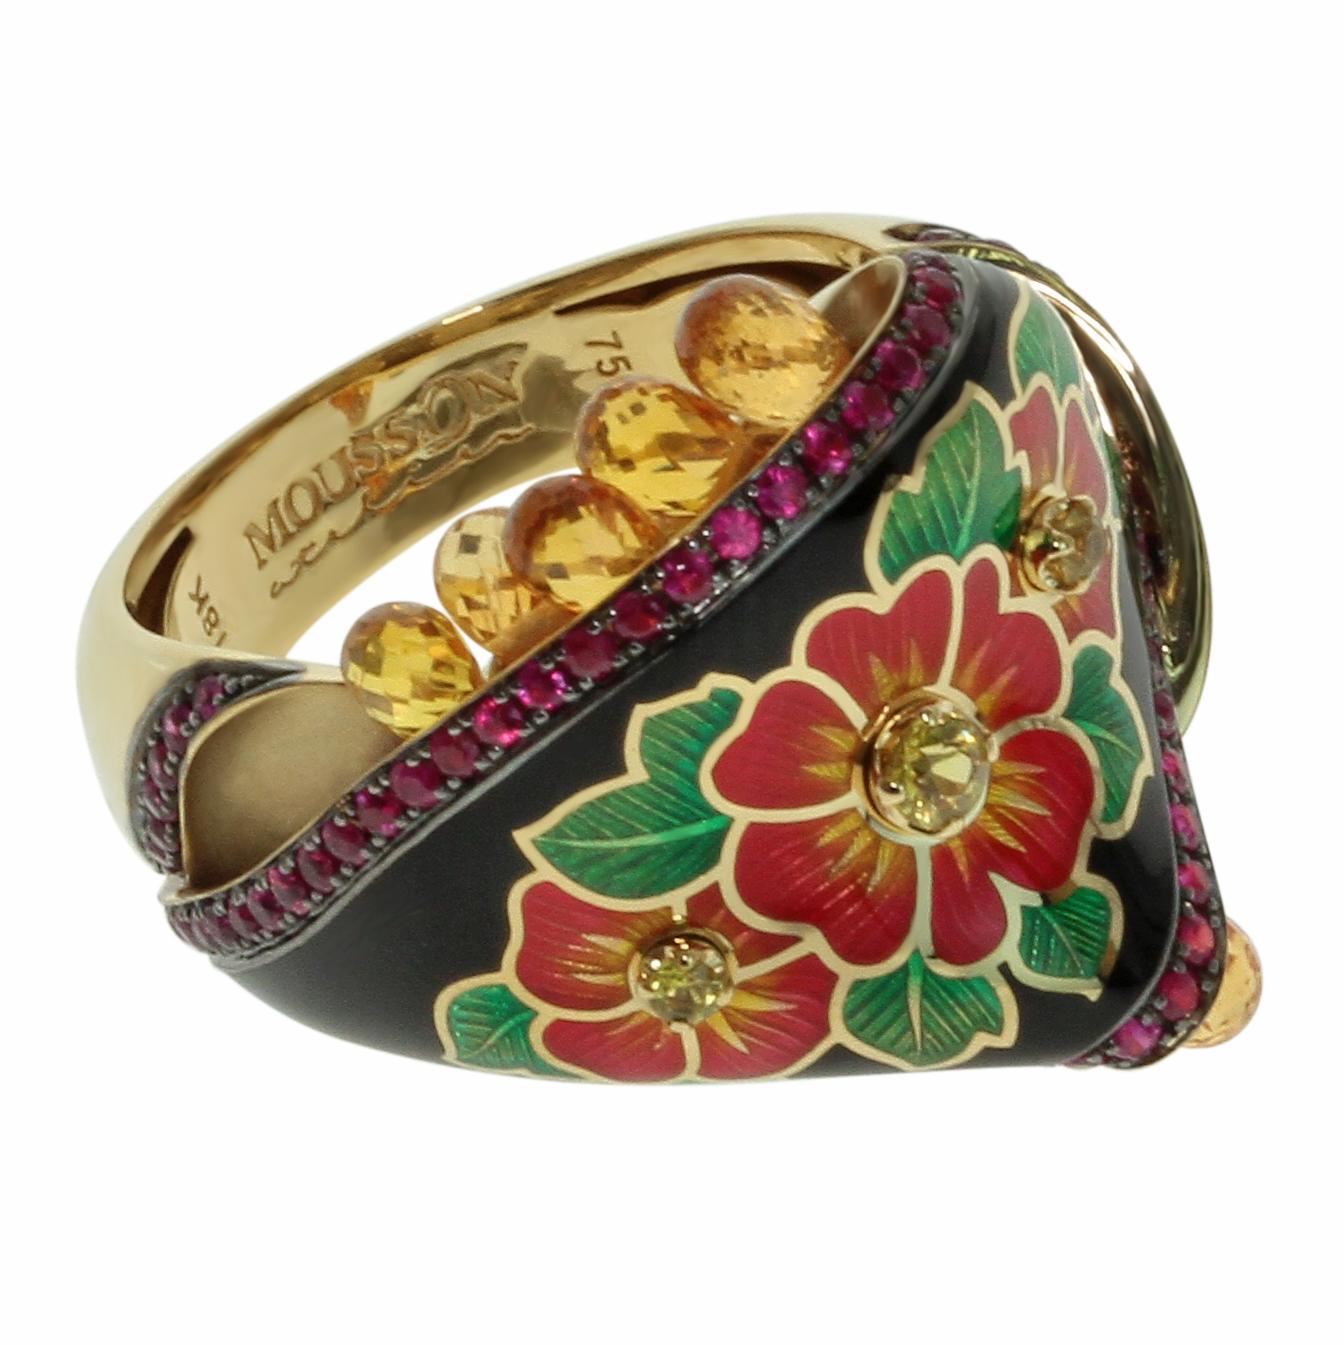 Ruby Orange Sapphire Enamel A'la Russe Small Ring
What do you know about Pavlovo Posad shawls? This is a large part of Russian culture, which originated in the 17th century. They are large patterned scarves, which are usually presented as a gift to